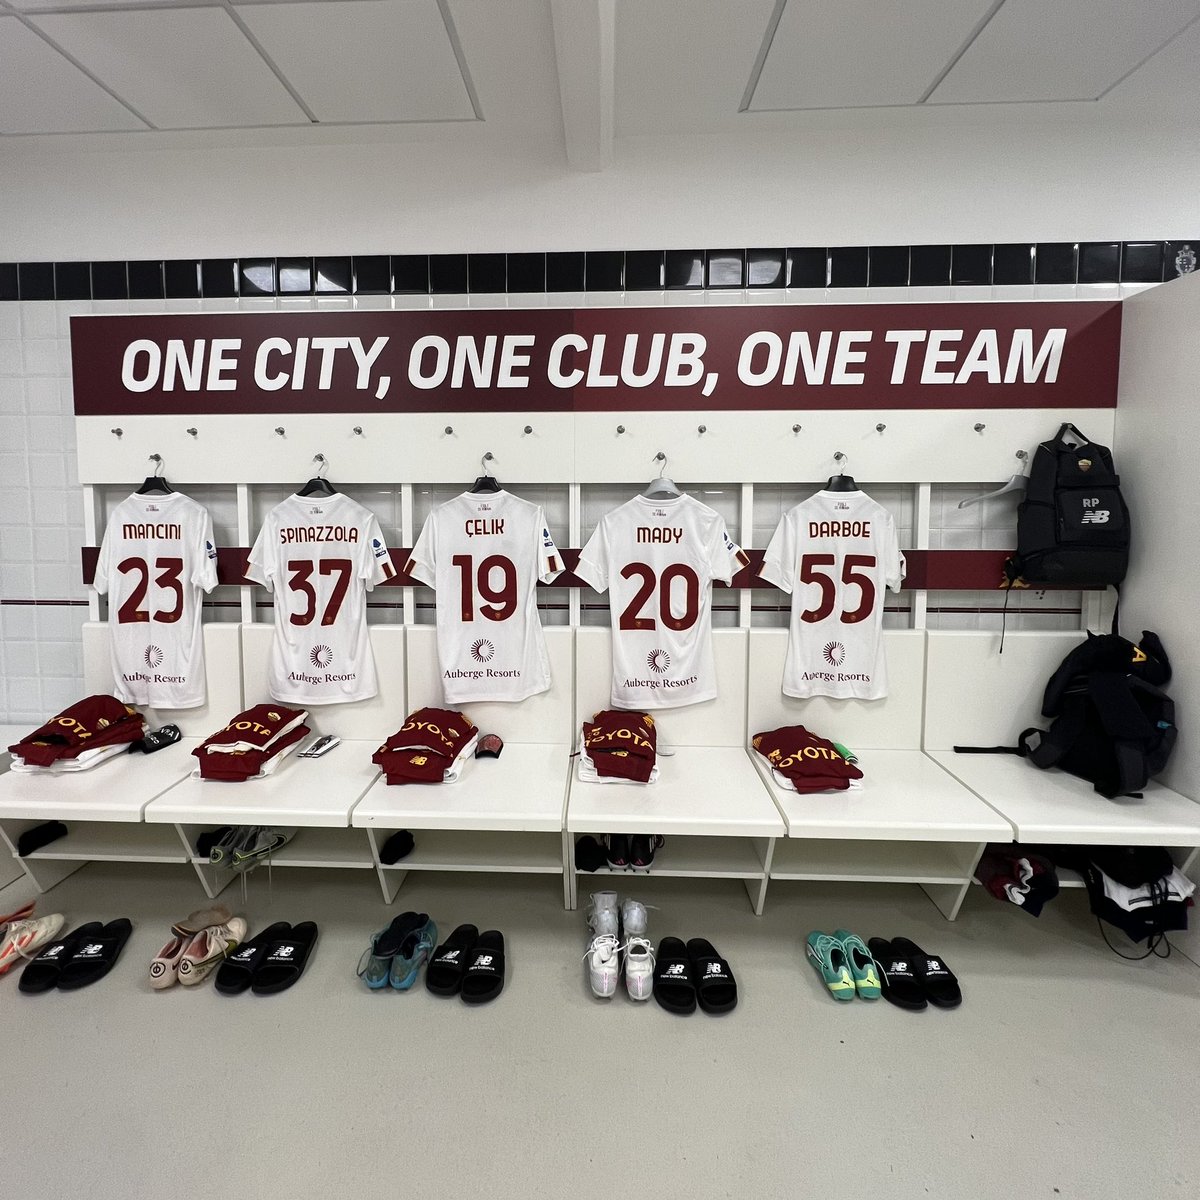 A look inside the dressing room. 🐺 

#ASRoma #RomaBologna